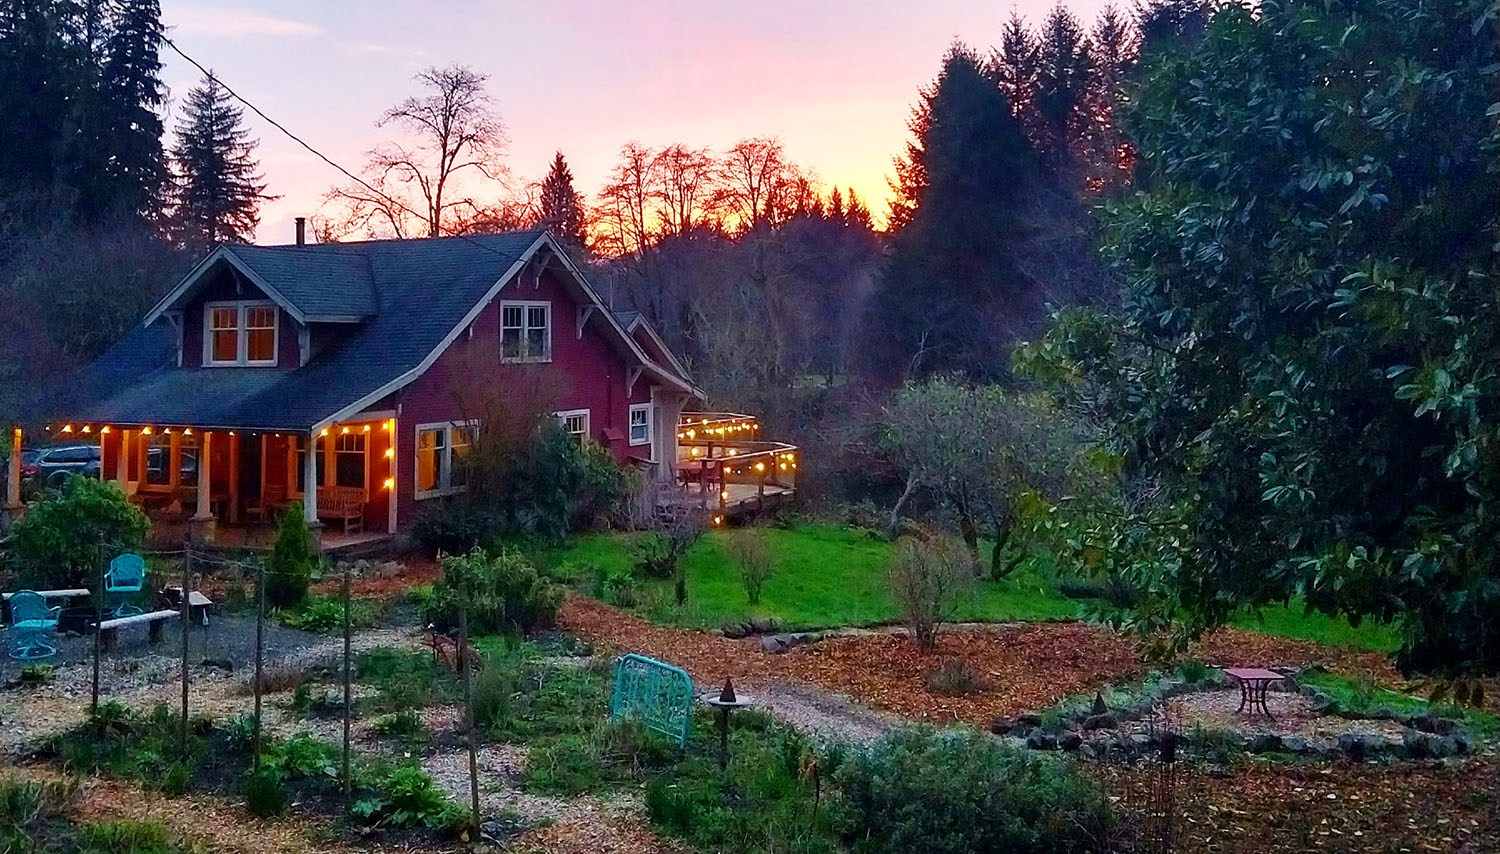 North Fork 53 house in evening light